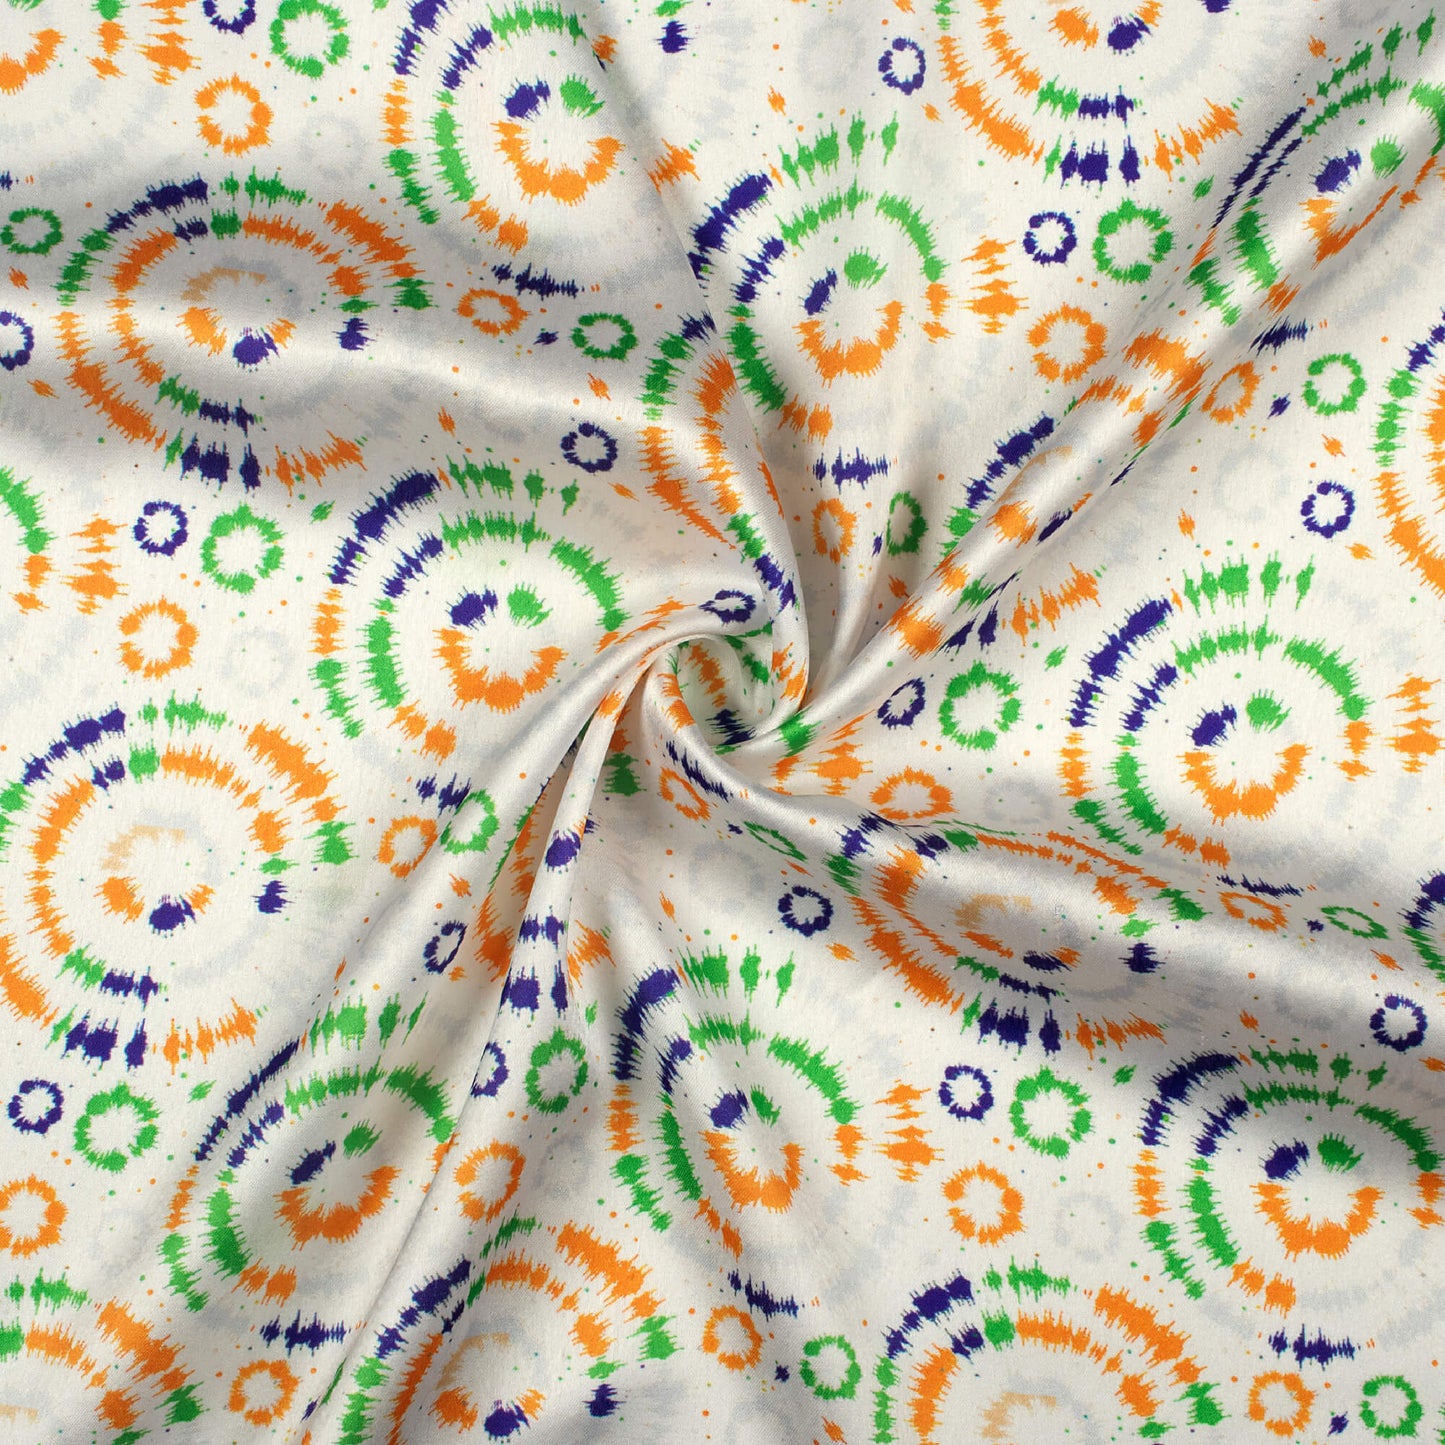 Tri-Color Quirky Printed Japan Satin Fabric